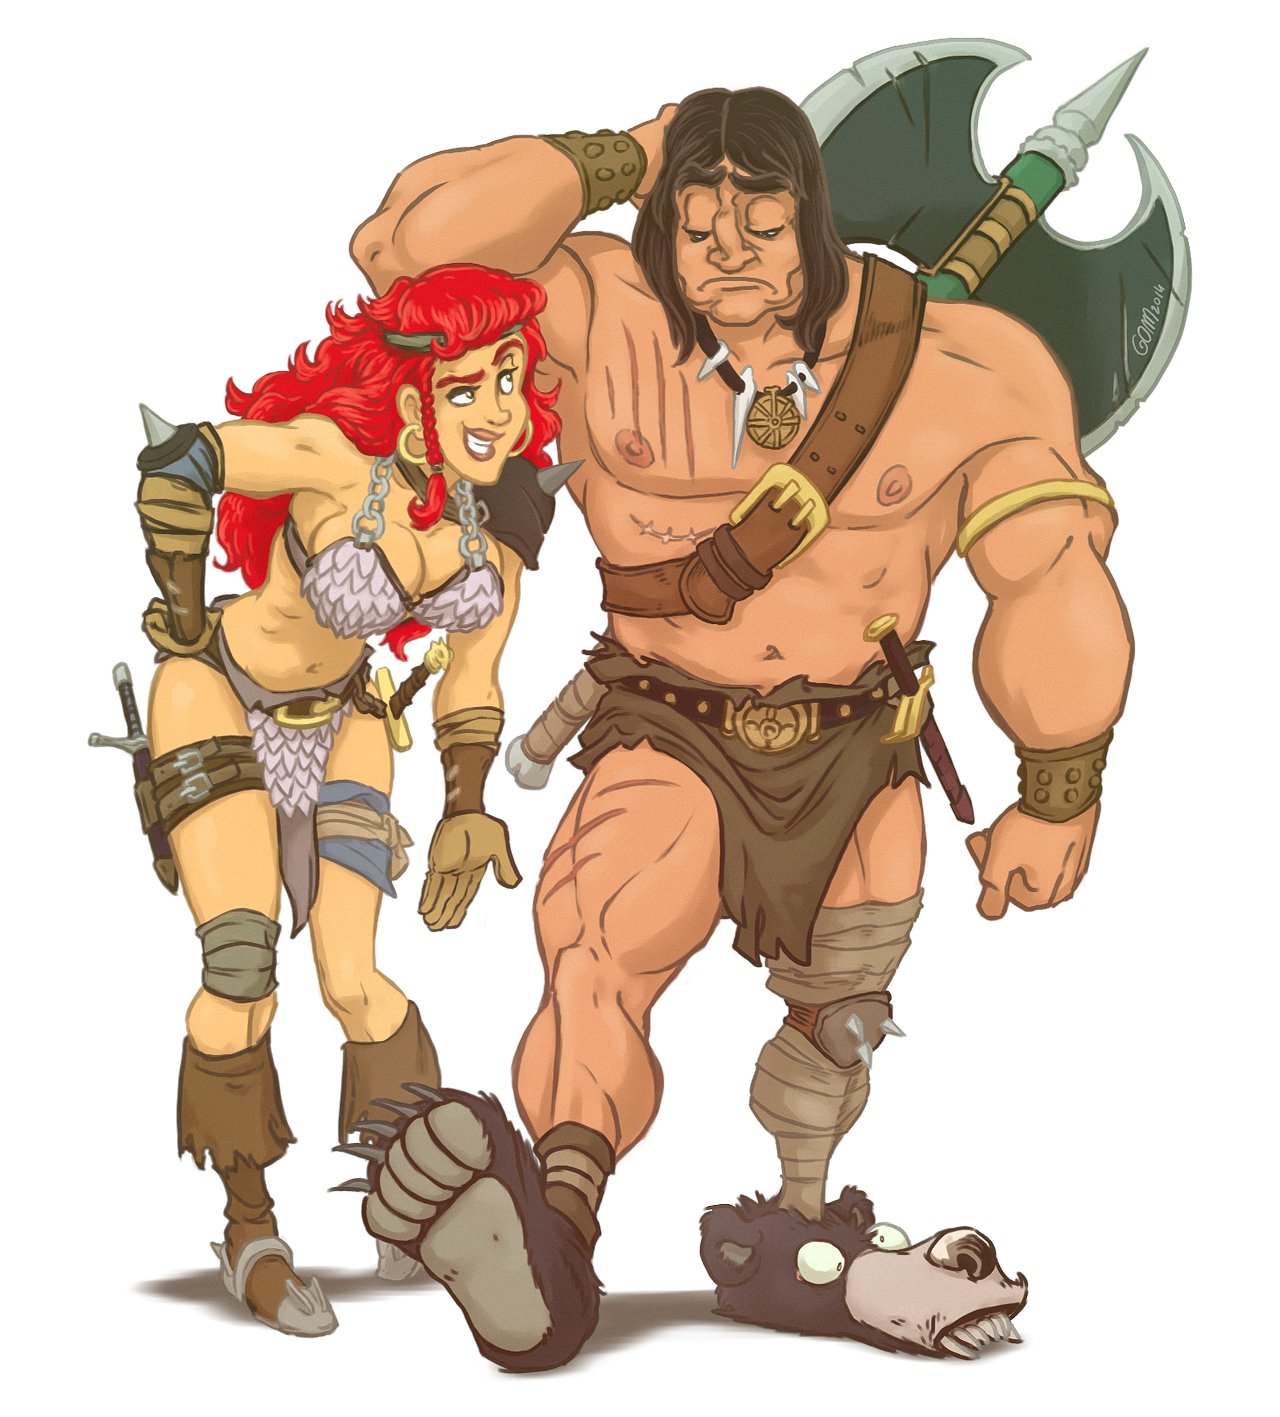 ArtStation - Conan rogues in the house